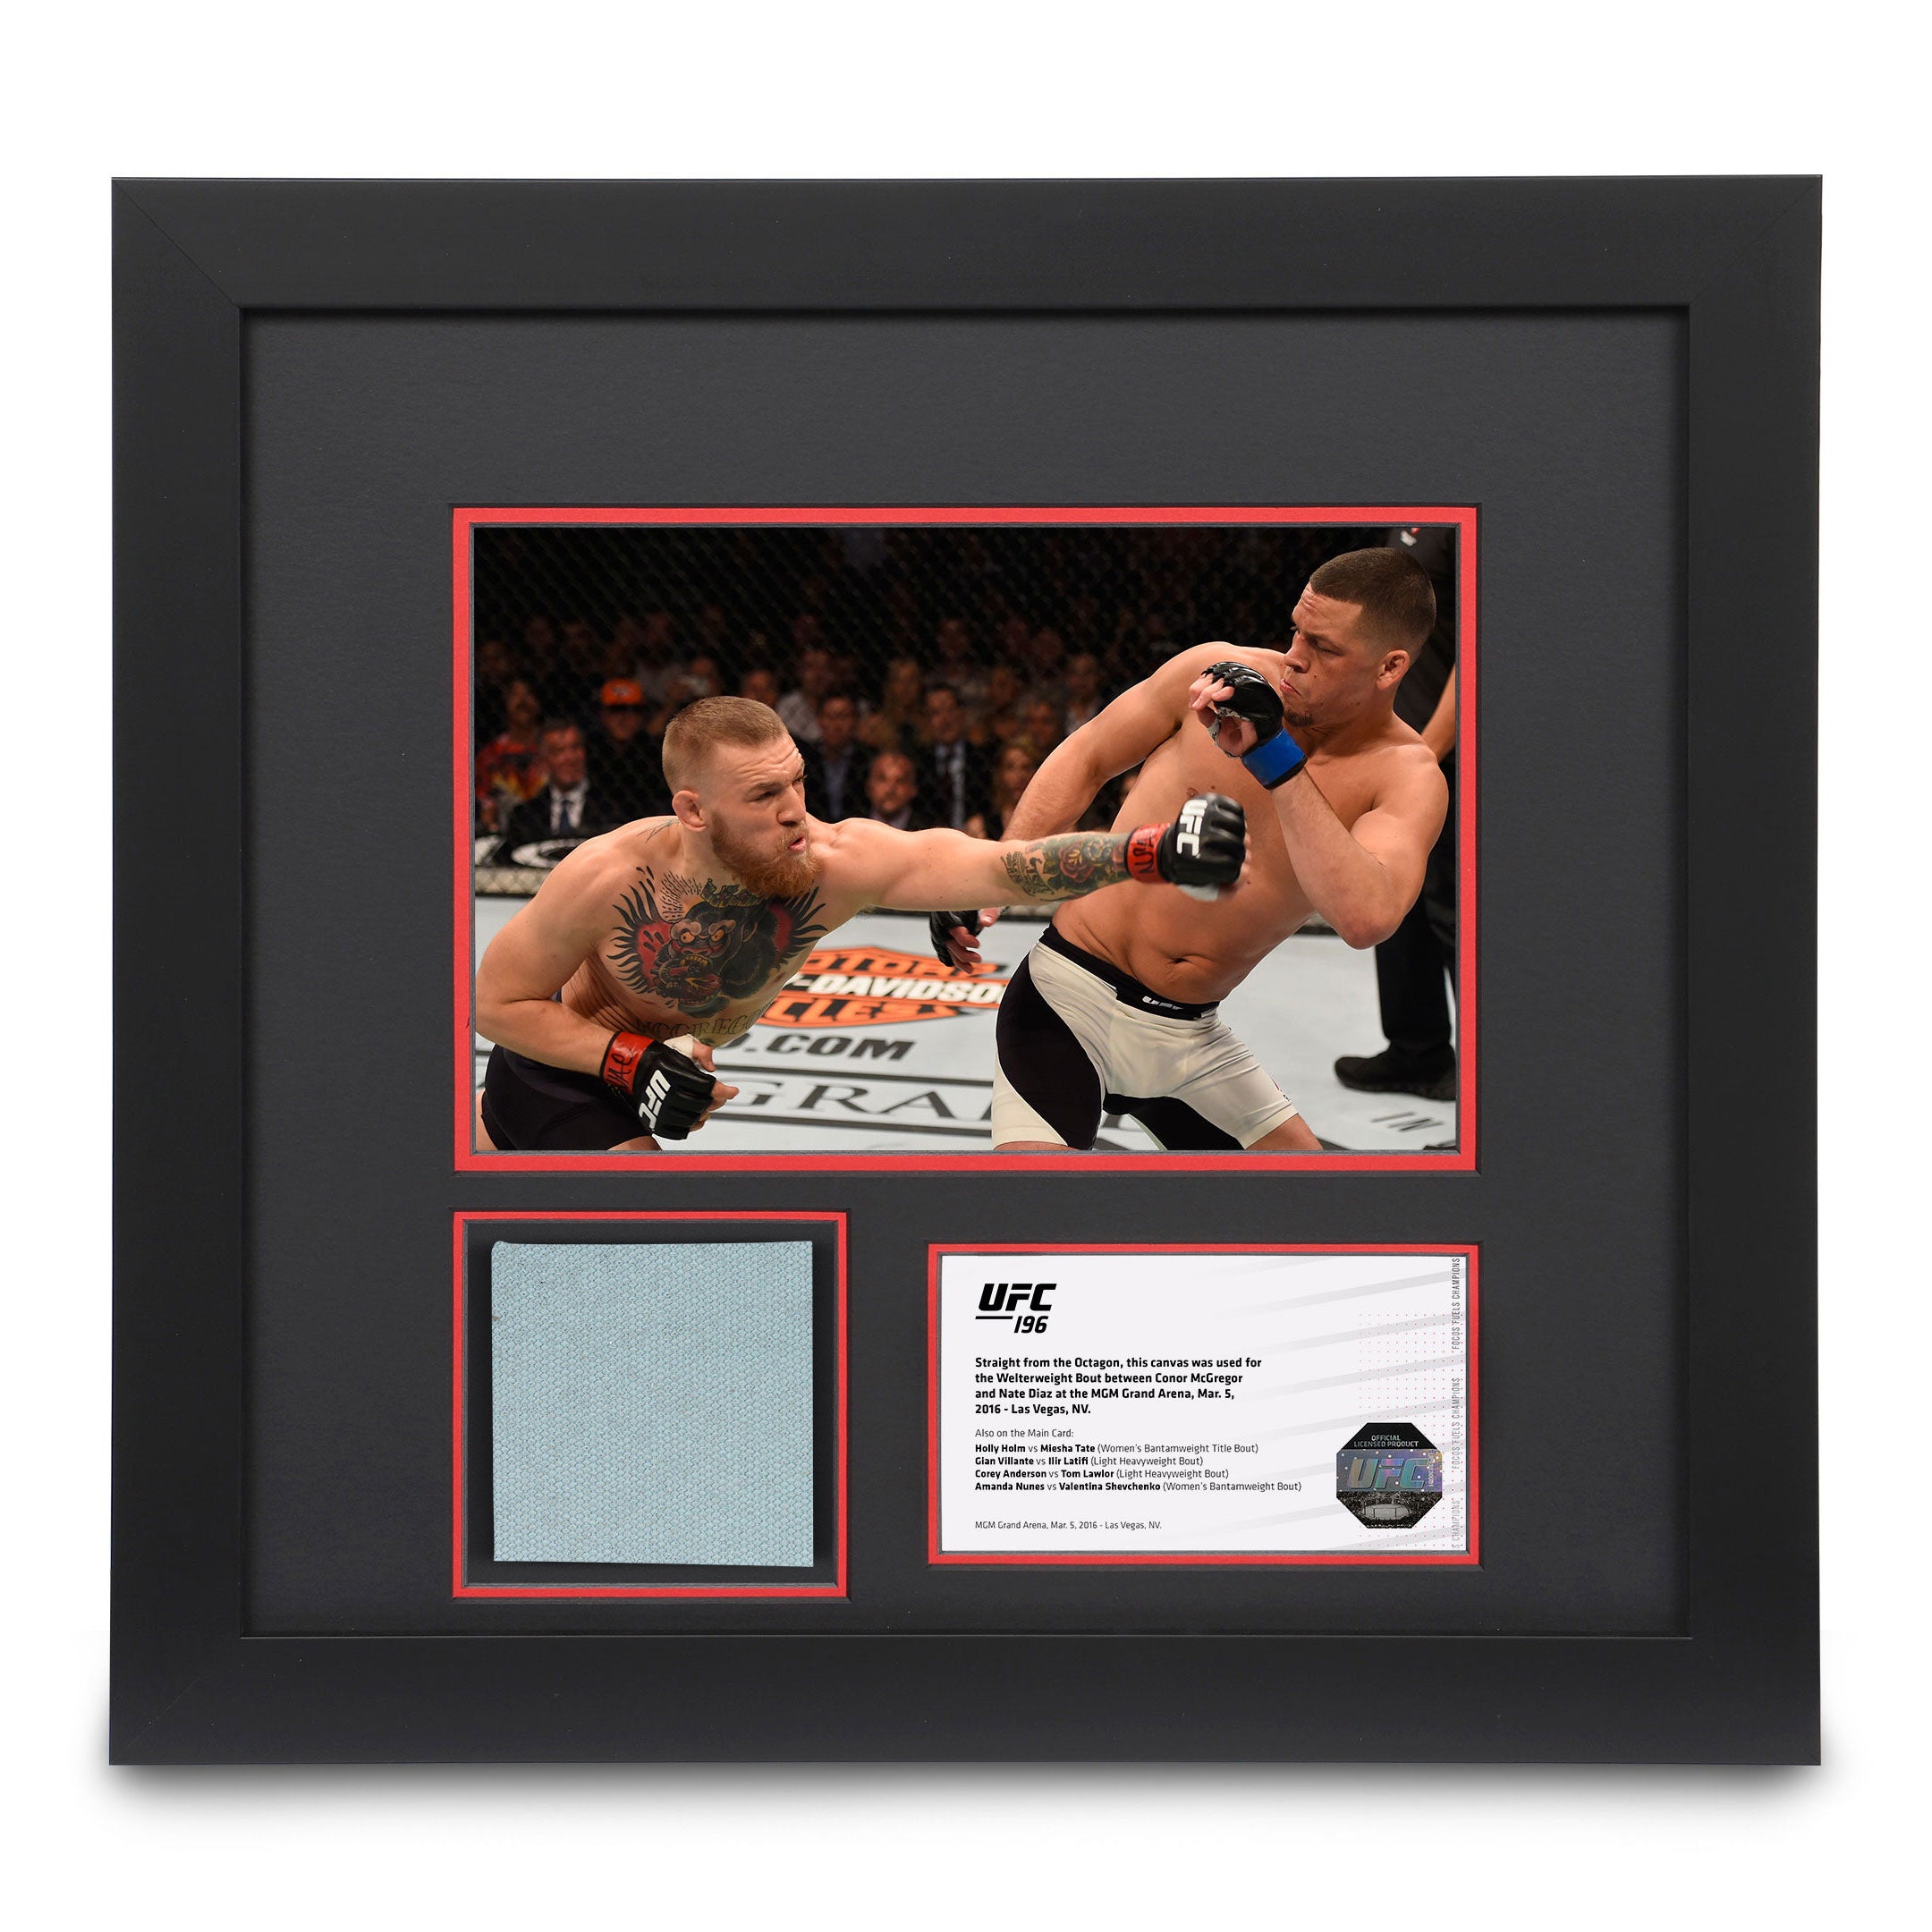 Canvas & Photo from the Diaz vs McGregor UFC 196 event 